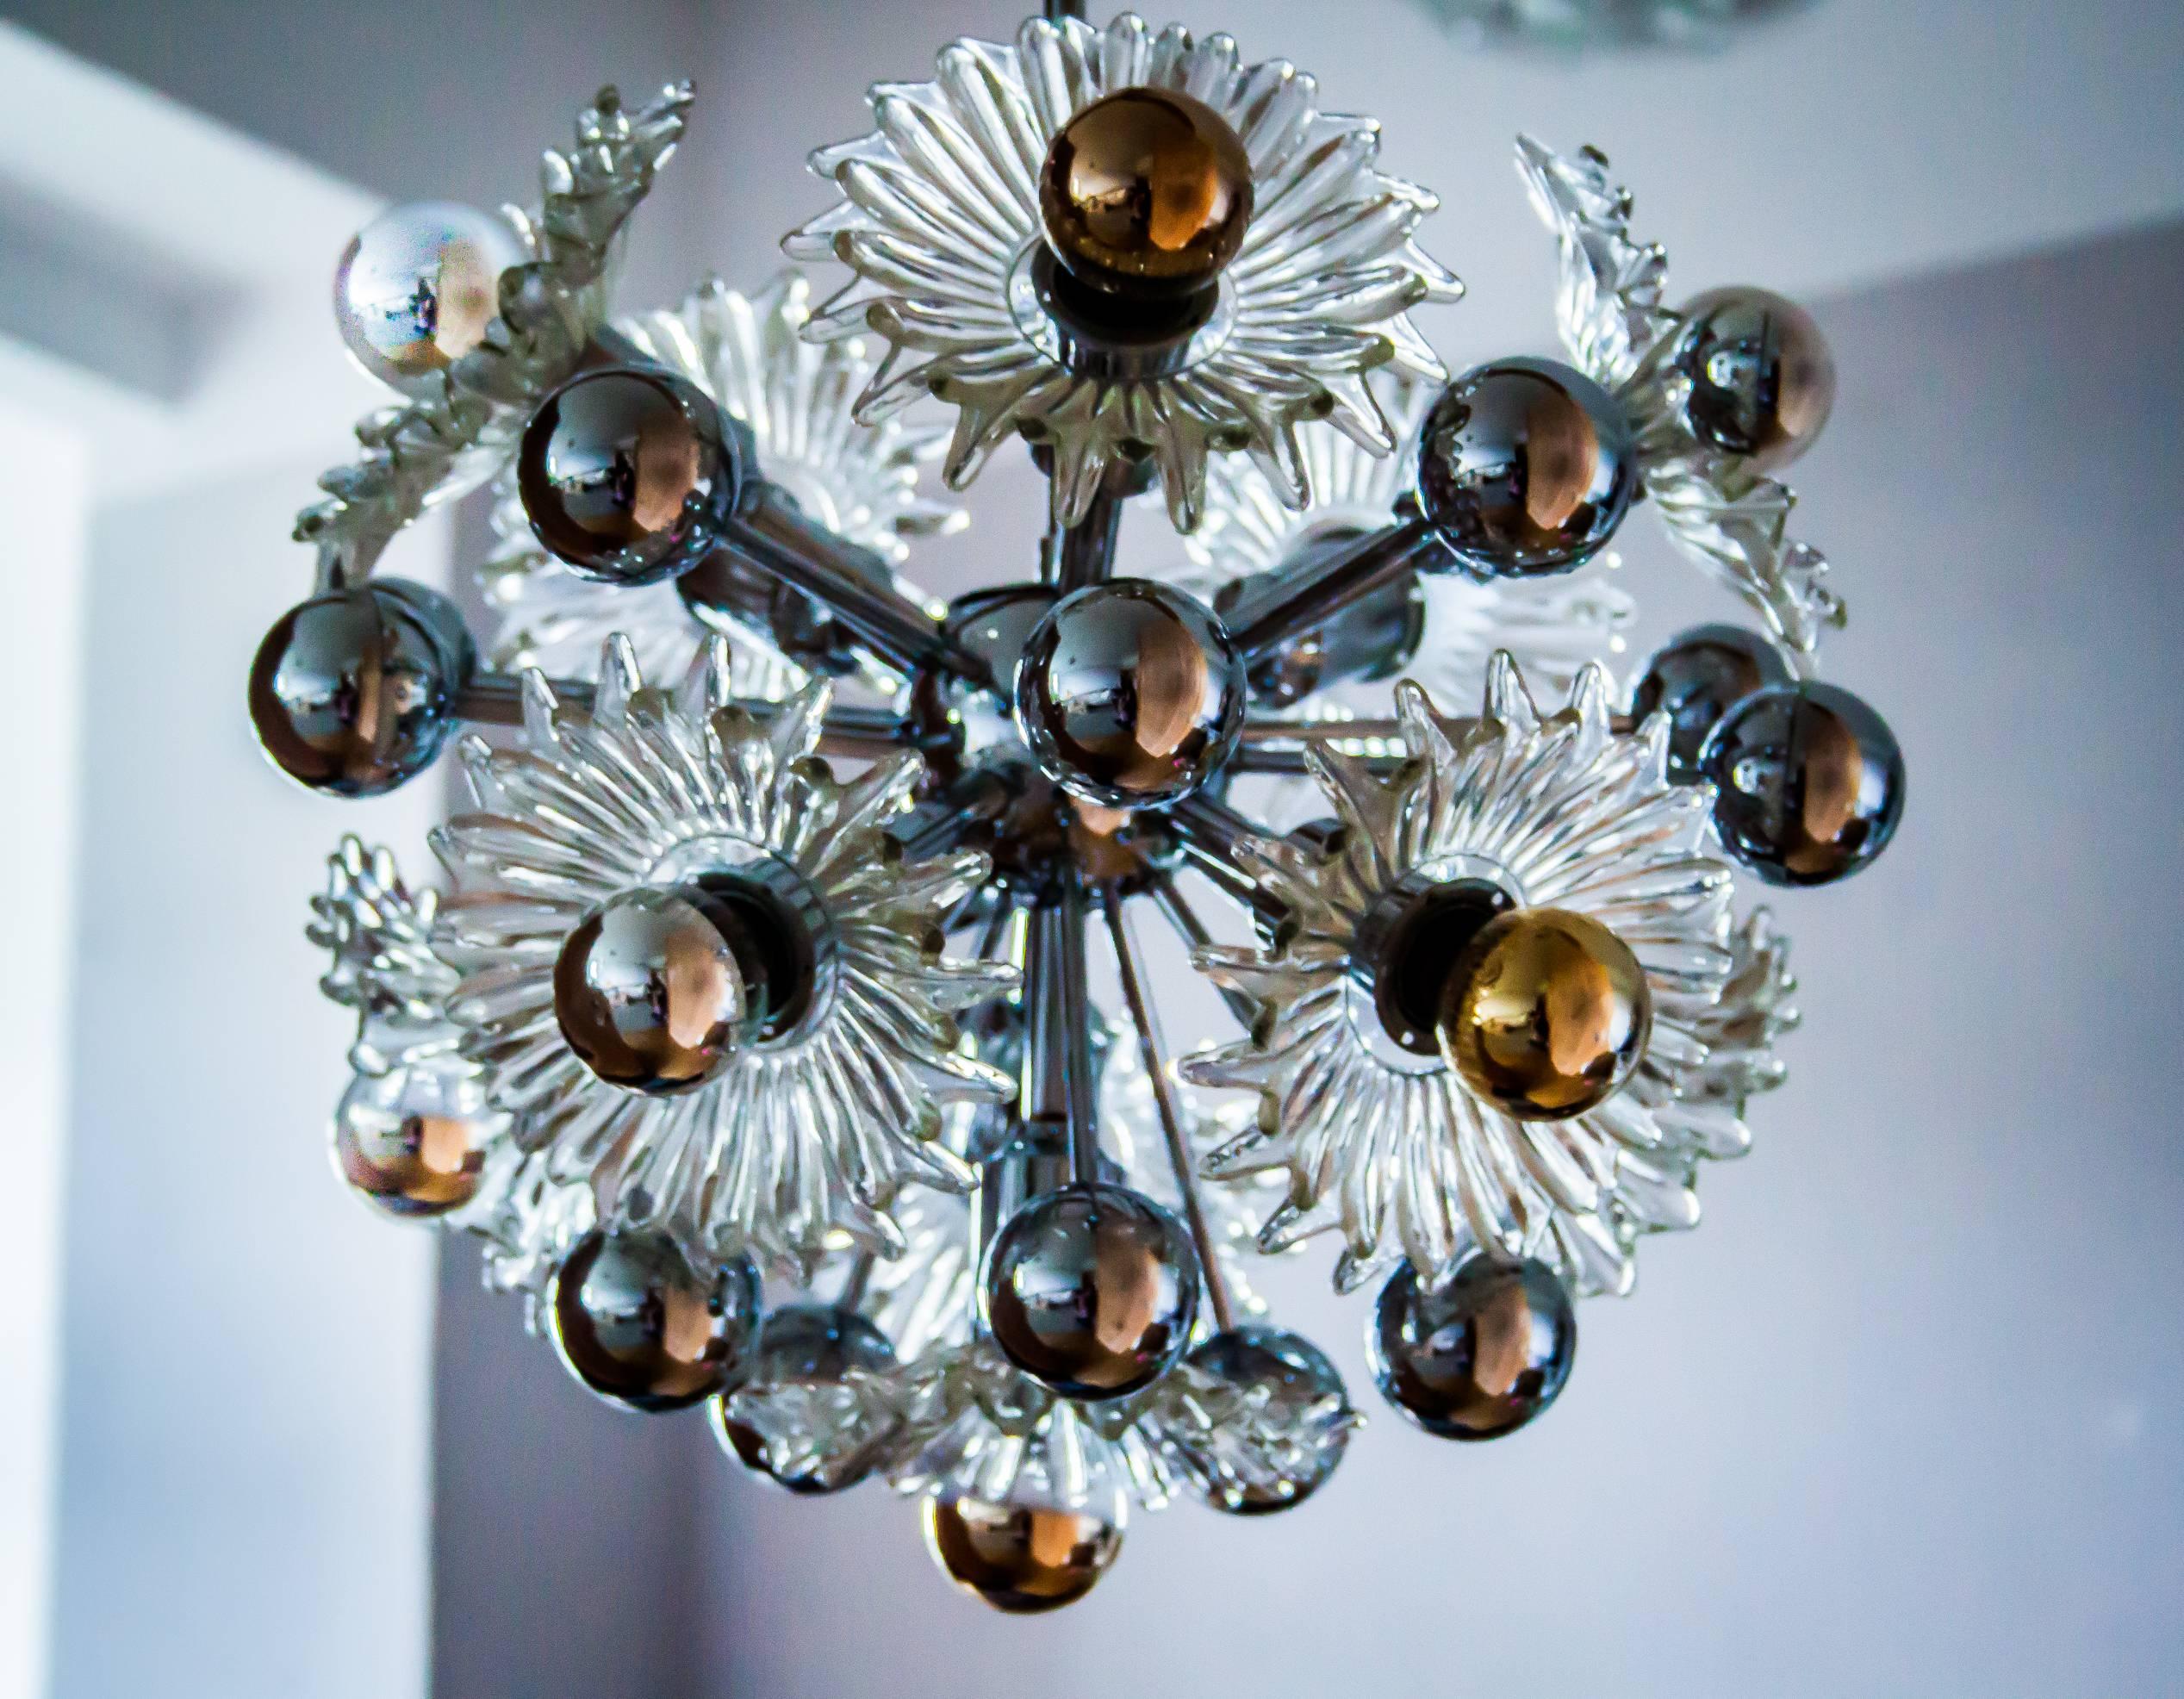 The ceiling pendant includes 11 fine crystal handmade glass flowers witch create a nice light effect at any room. 
The fixture is in near mint condition, has nearly no signs of use. See photos.
It has 15 chrome globes and 11 E 14 sockets for